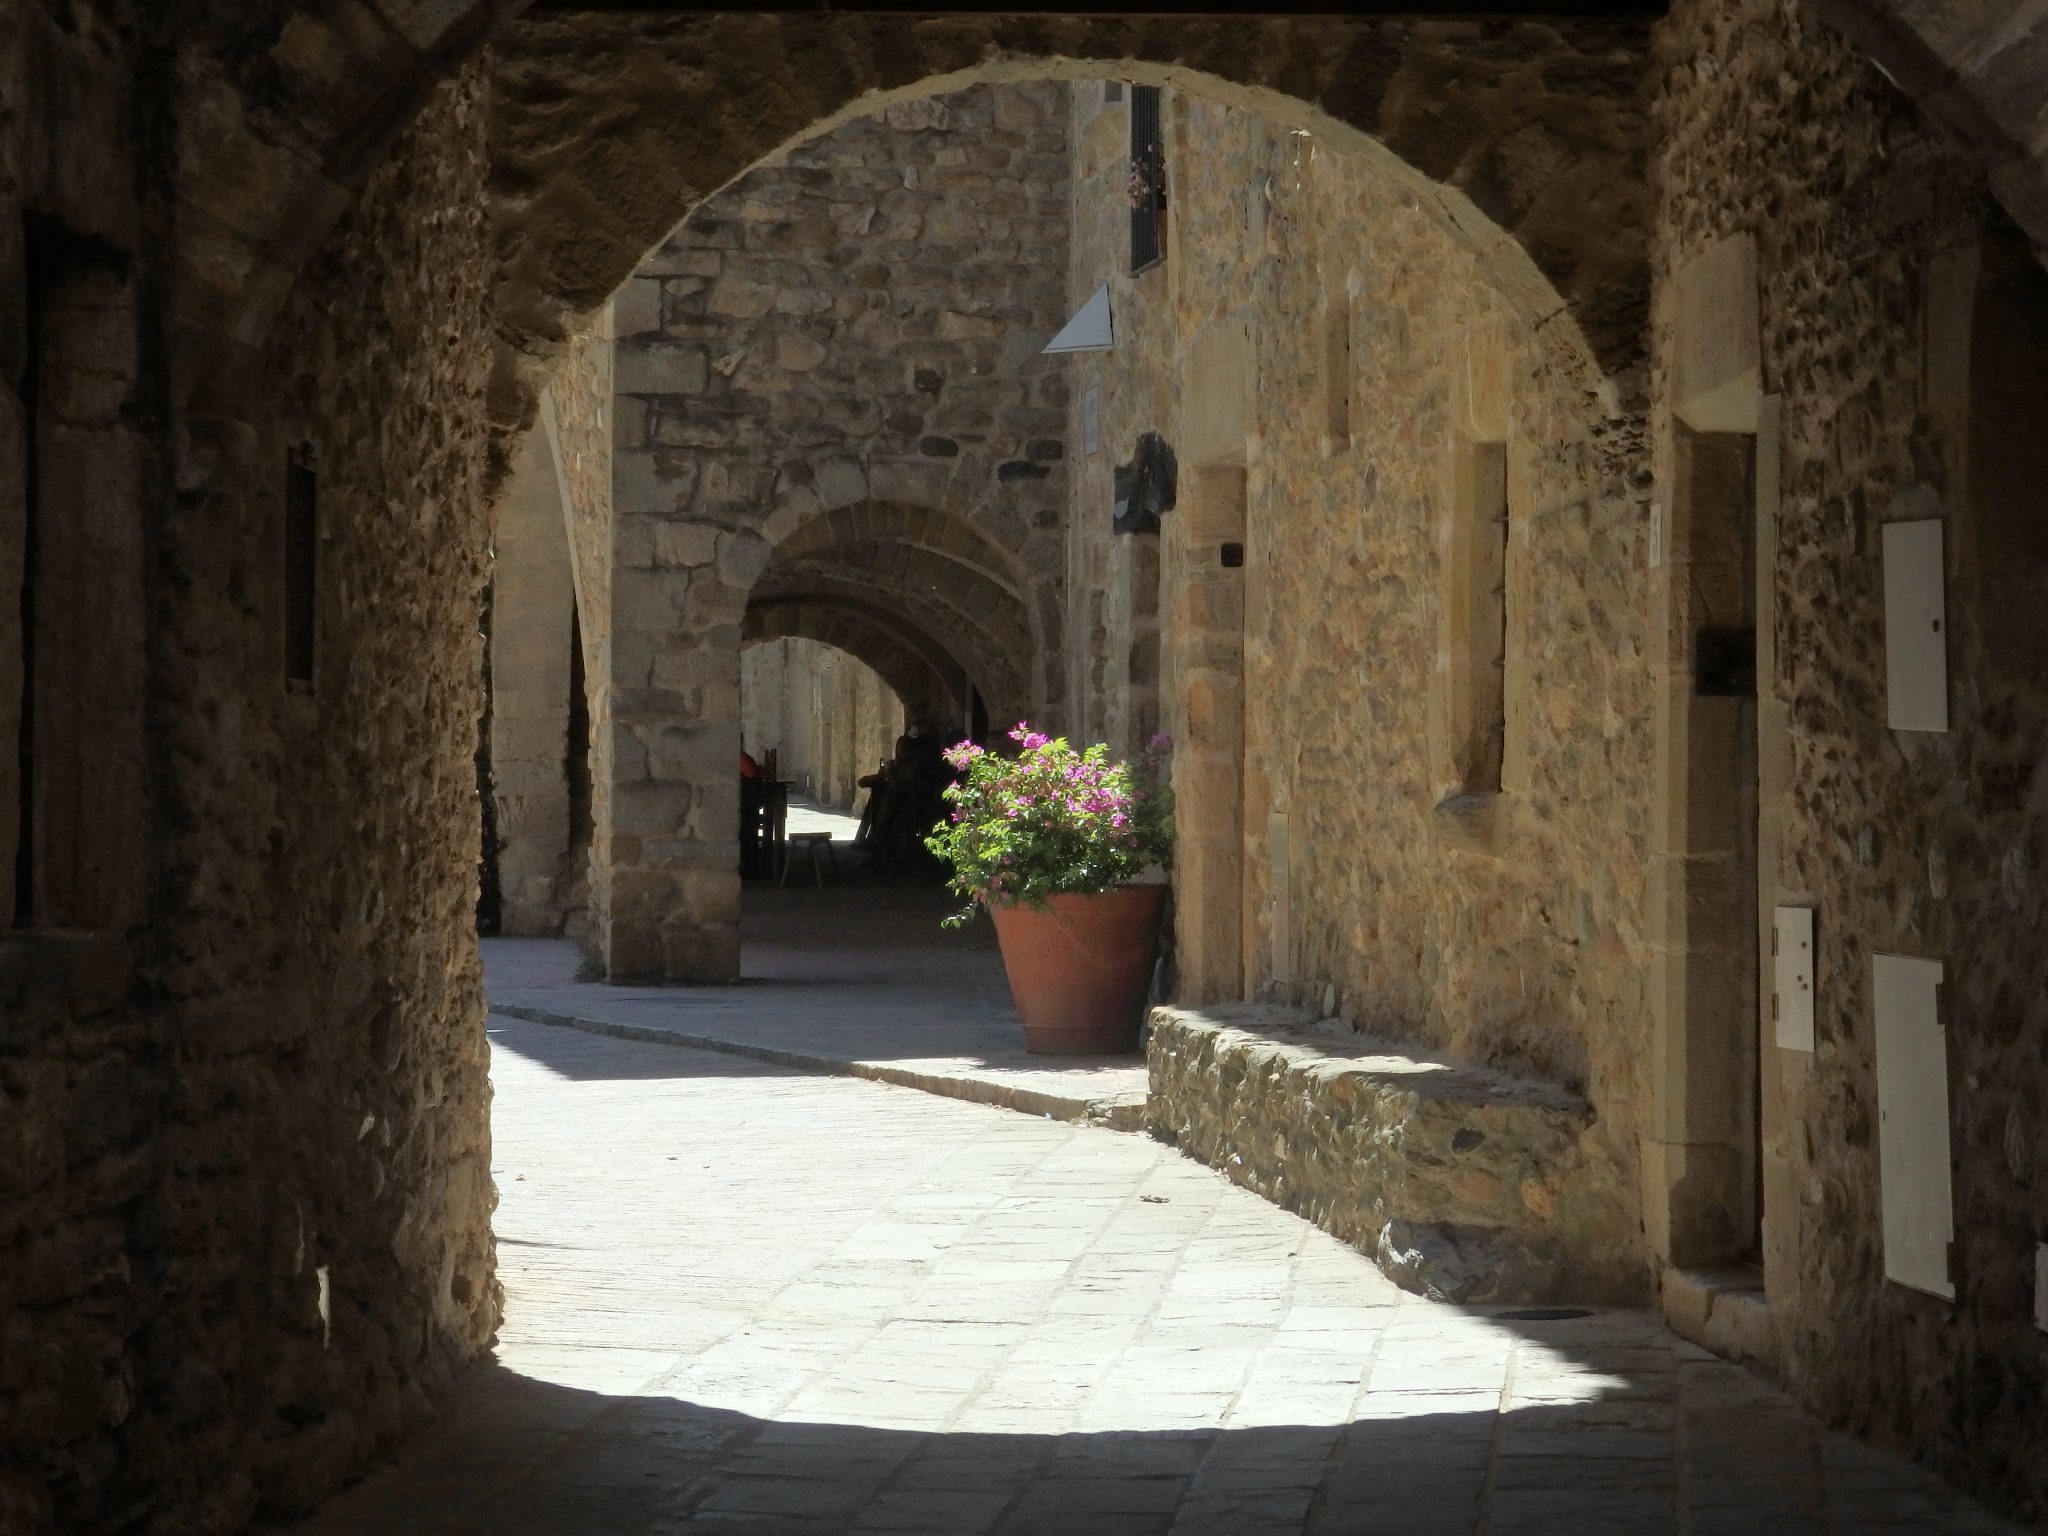 Archways provide shade in Monells,, in the Baix Emporda,, Spain